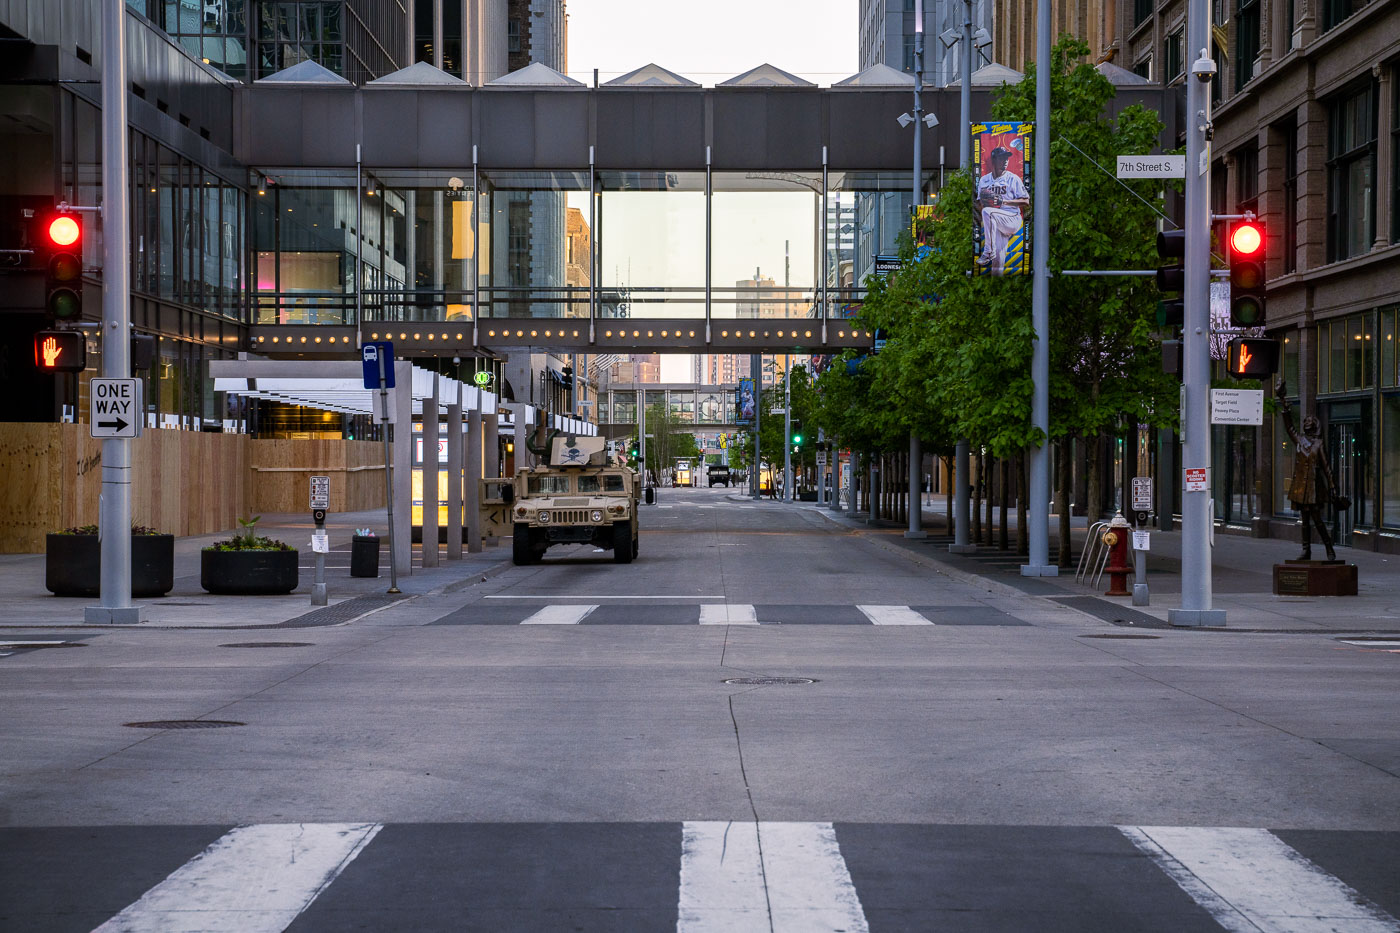 National Guard vehicles in Minneapolis on Nicollet Mall